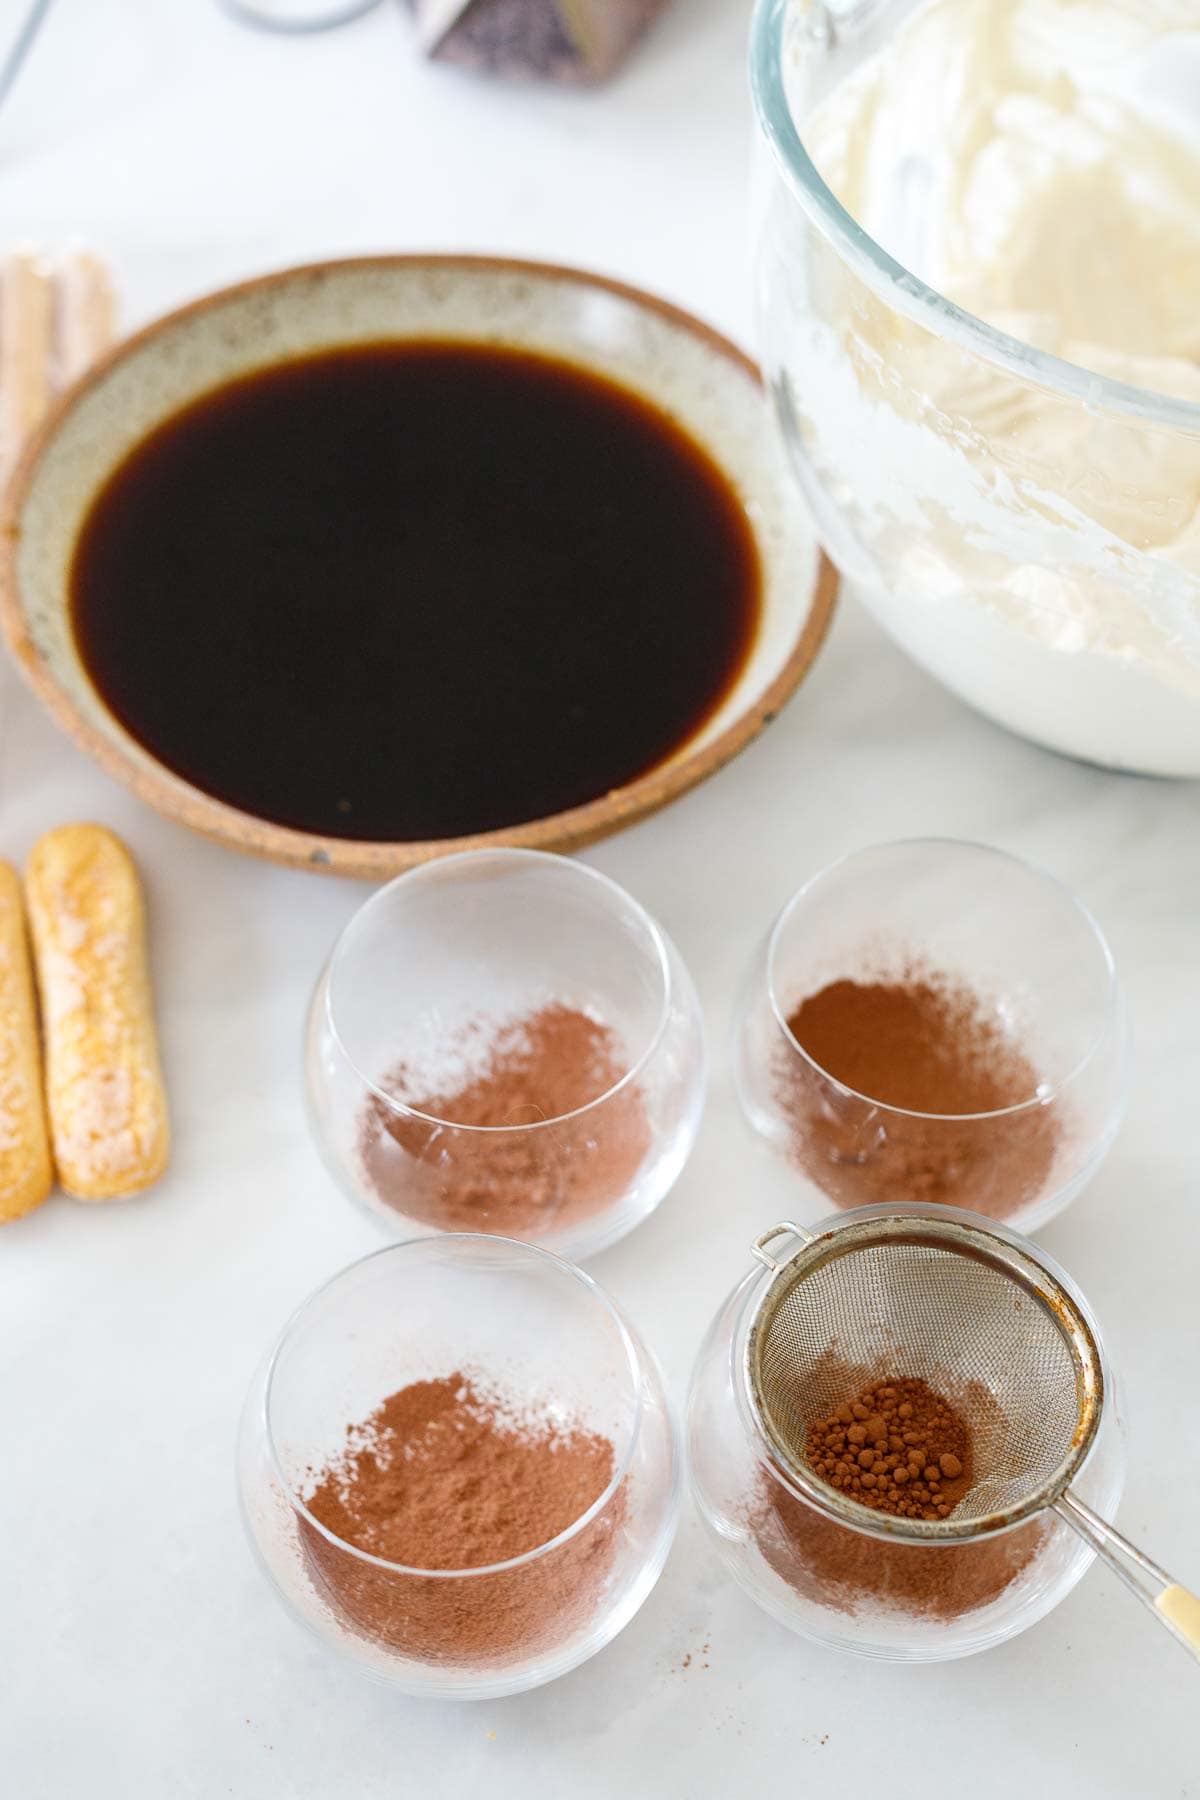 coffee mixture in bowl next to glasses with cocoa powder dusting in bottoms of glasses